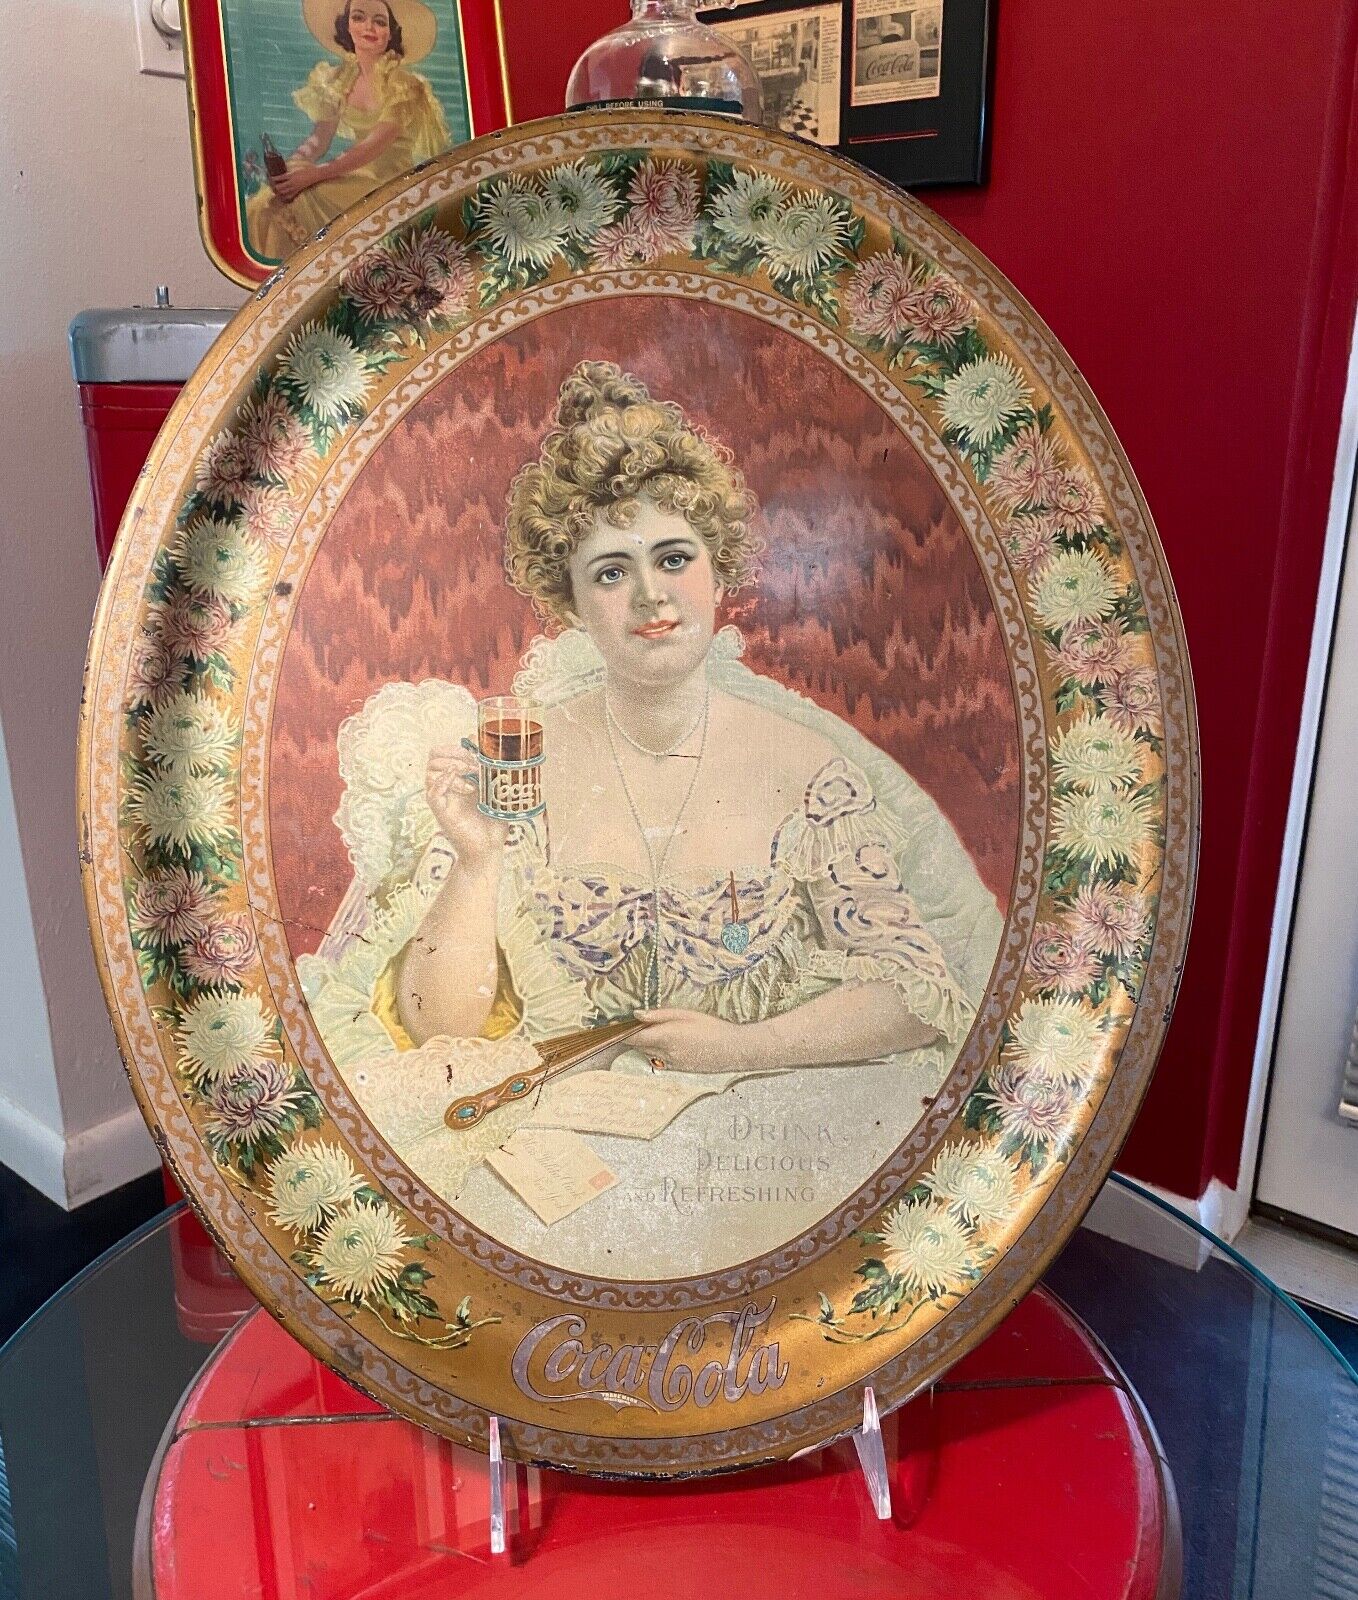 Coca Cola 1903 Hilda Clark Holding Glass Large Oval Serving Tray Chas. Shonk